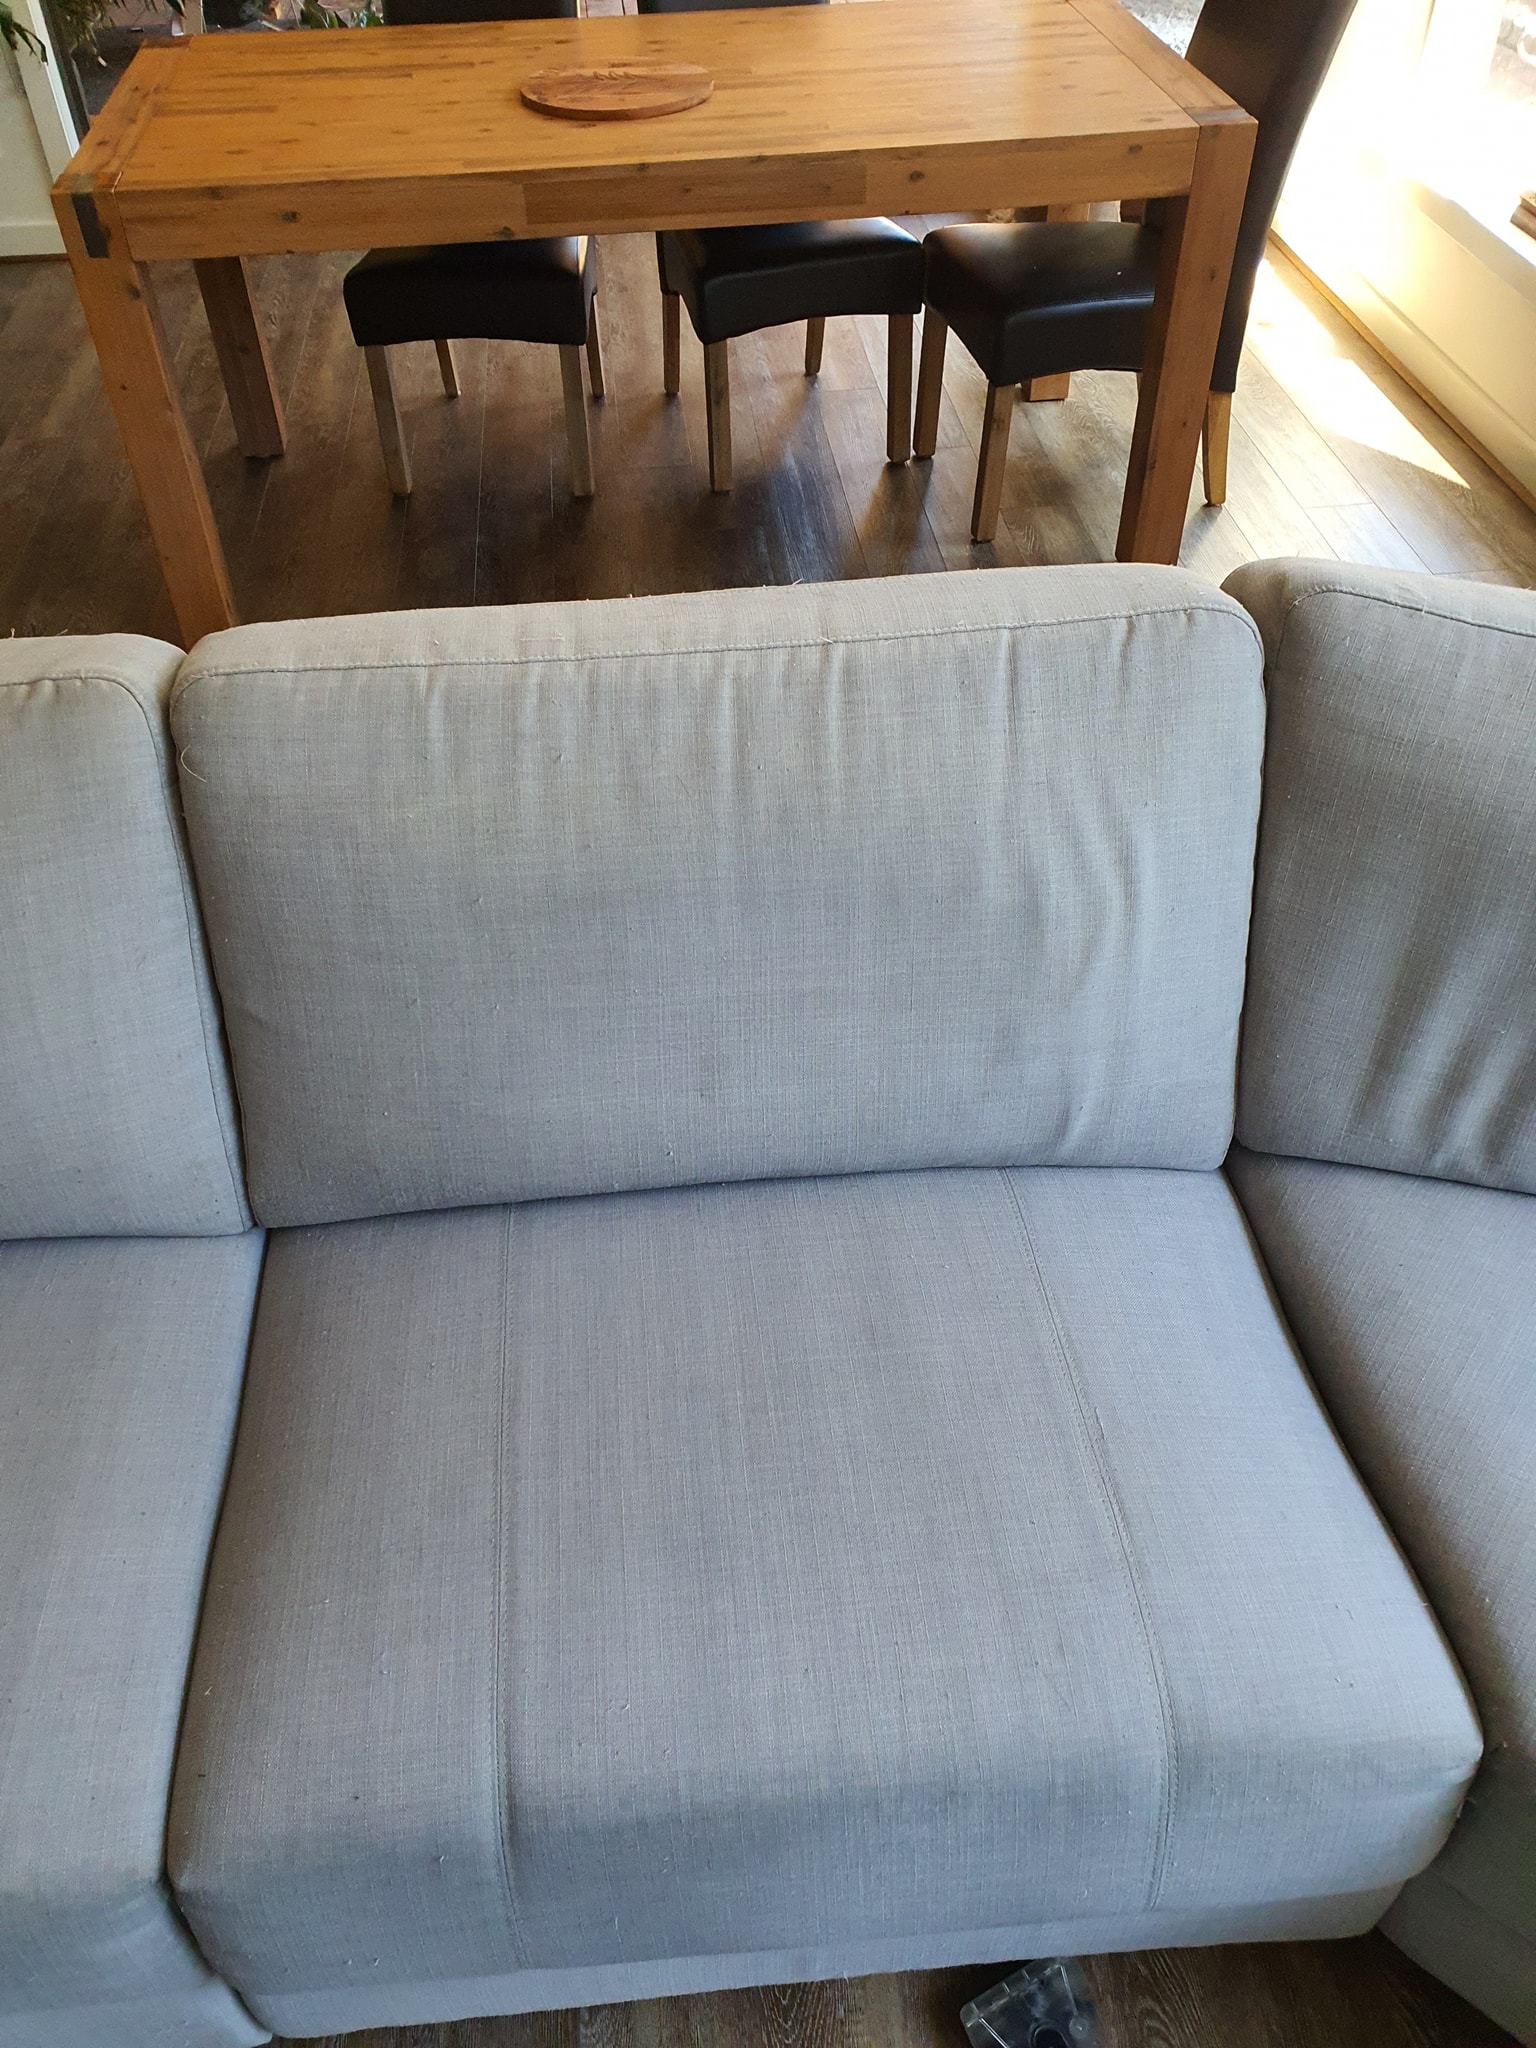 Where Can You Get Professional Upholstery Cleaning Services In Melbourne